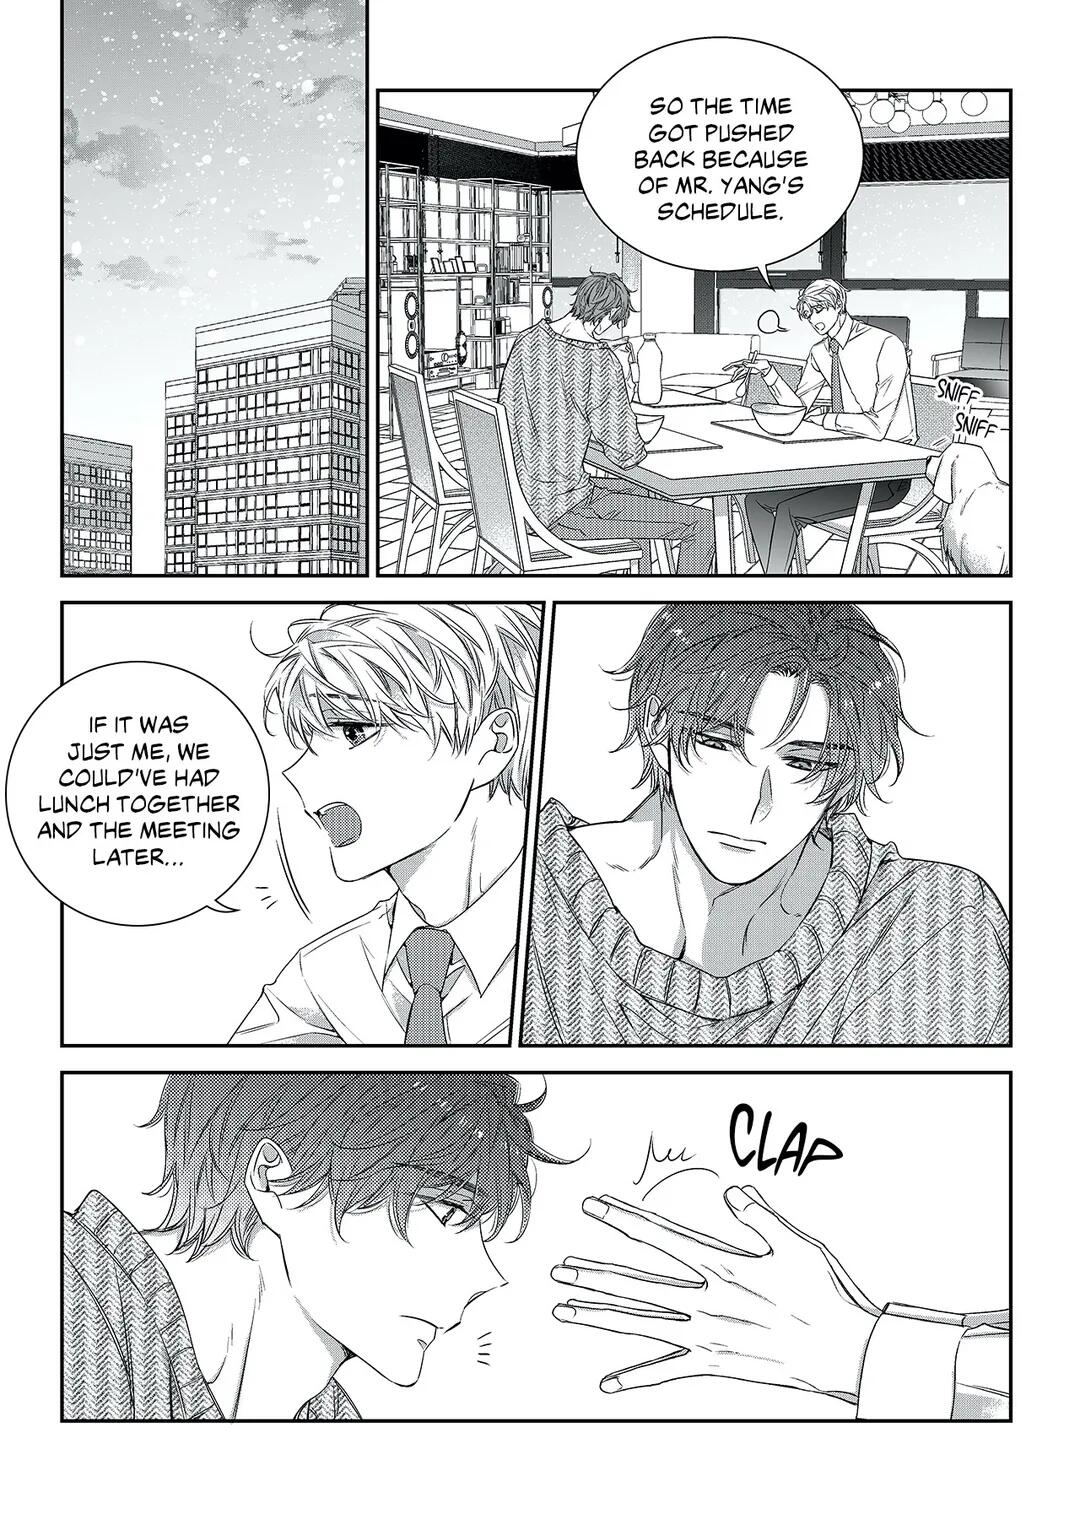 Unintentional Love Story - Page 2